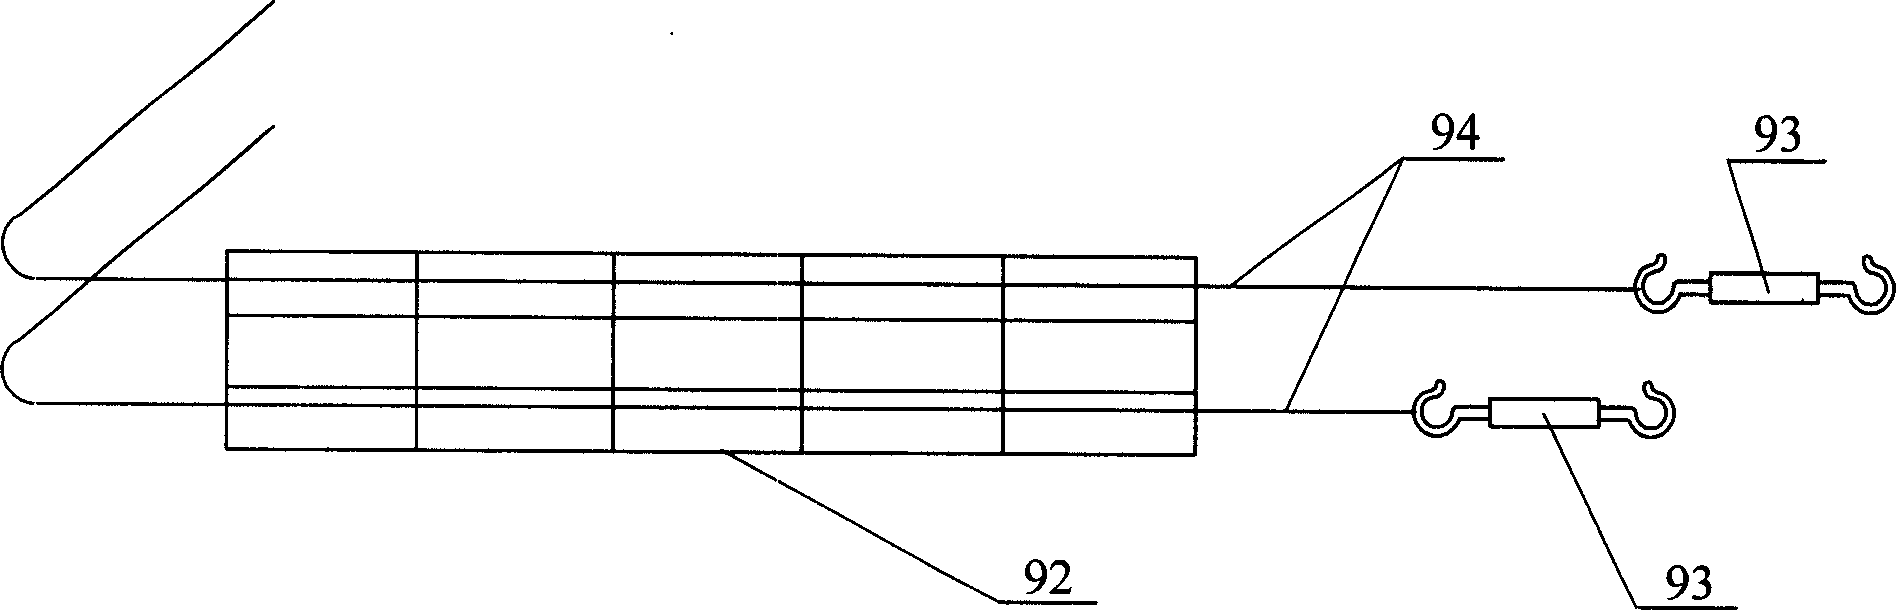 Rectangular materials transporting and fastening system